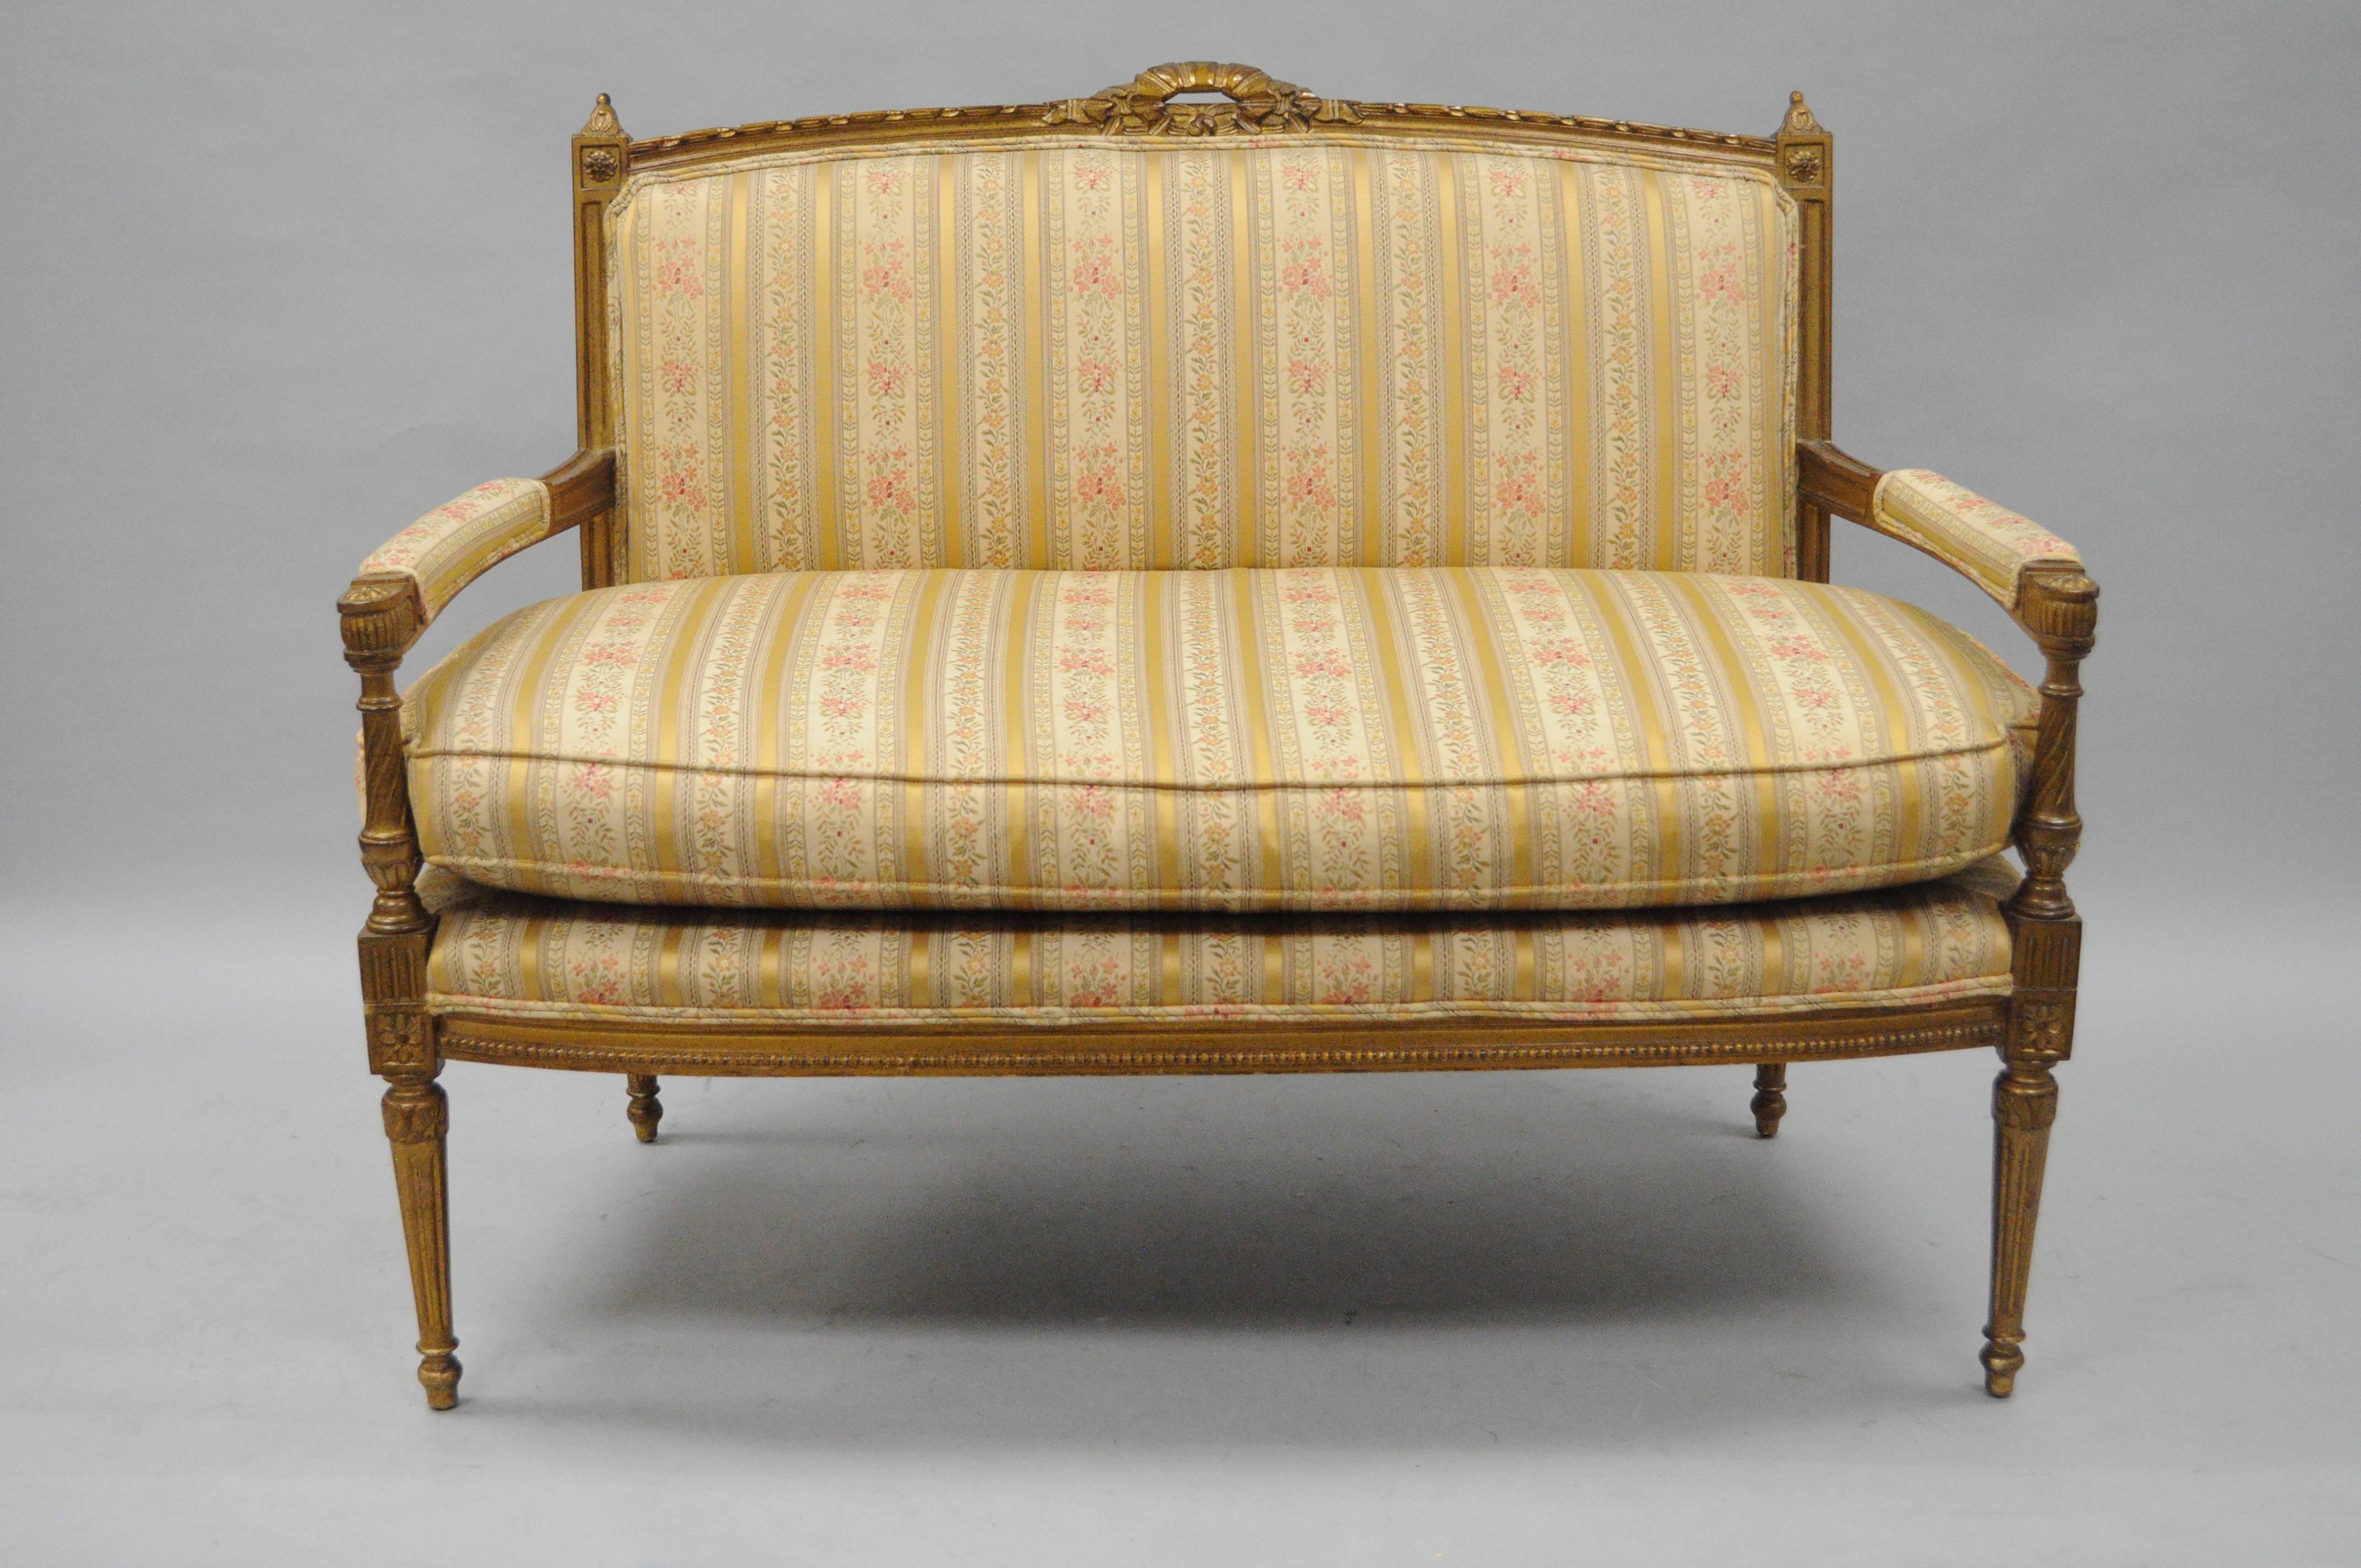 Vintage French Louis XVI style gold settee, circa mid-20th century. Settee features a ribbon carved crest, rectangular back, solid wood frame, upholstered armrests, gold striped fabric with pink floral print, reed and tapered legs, loose cushion,